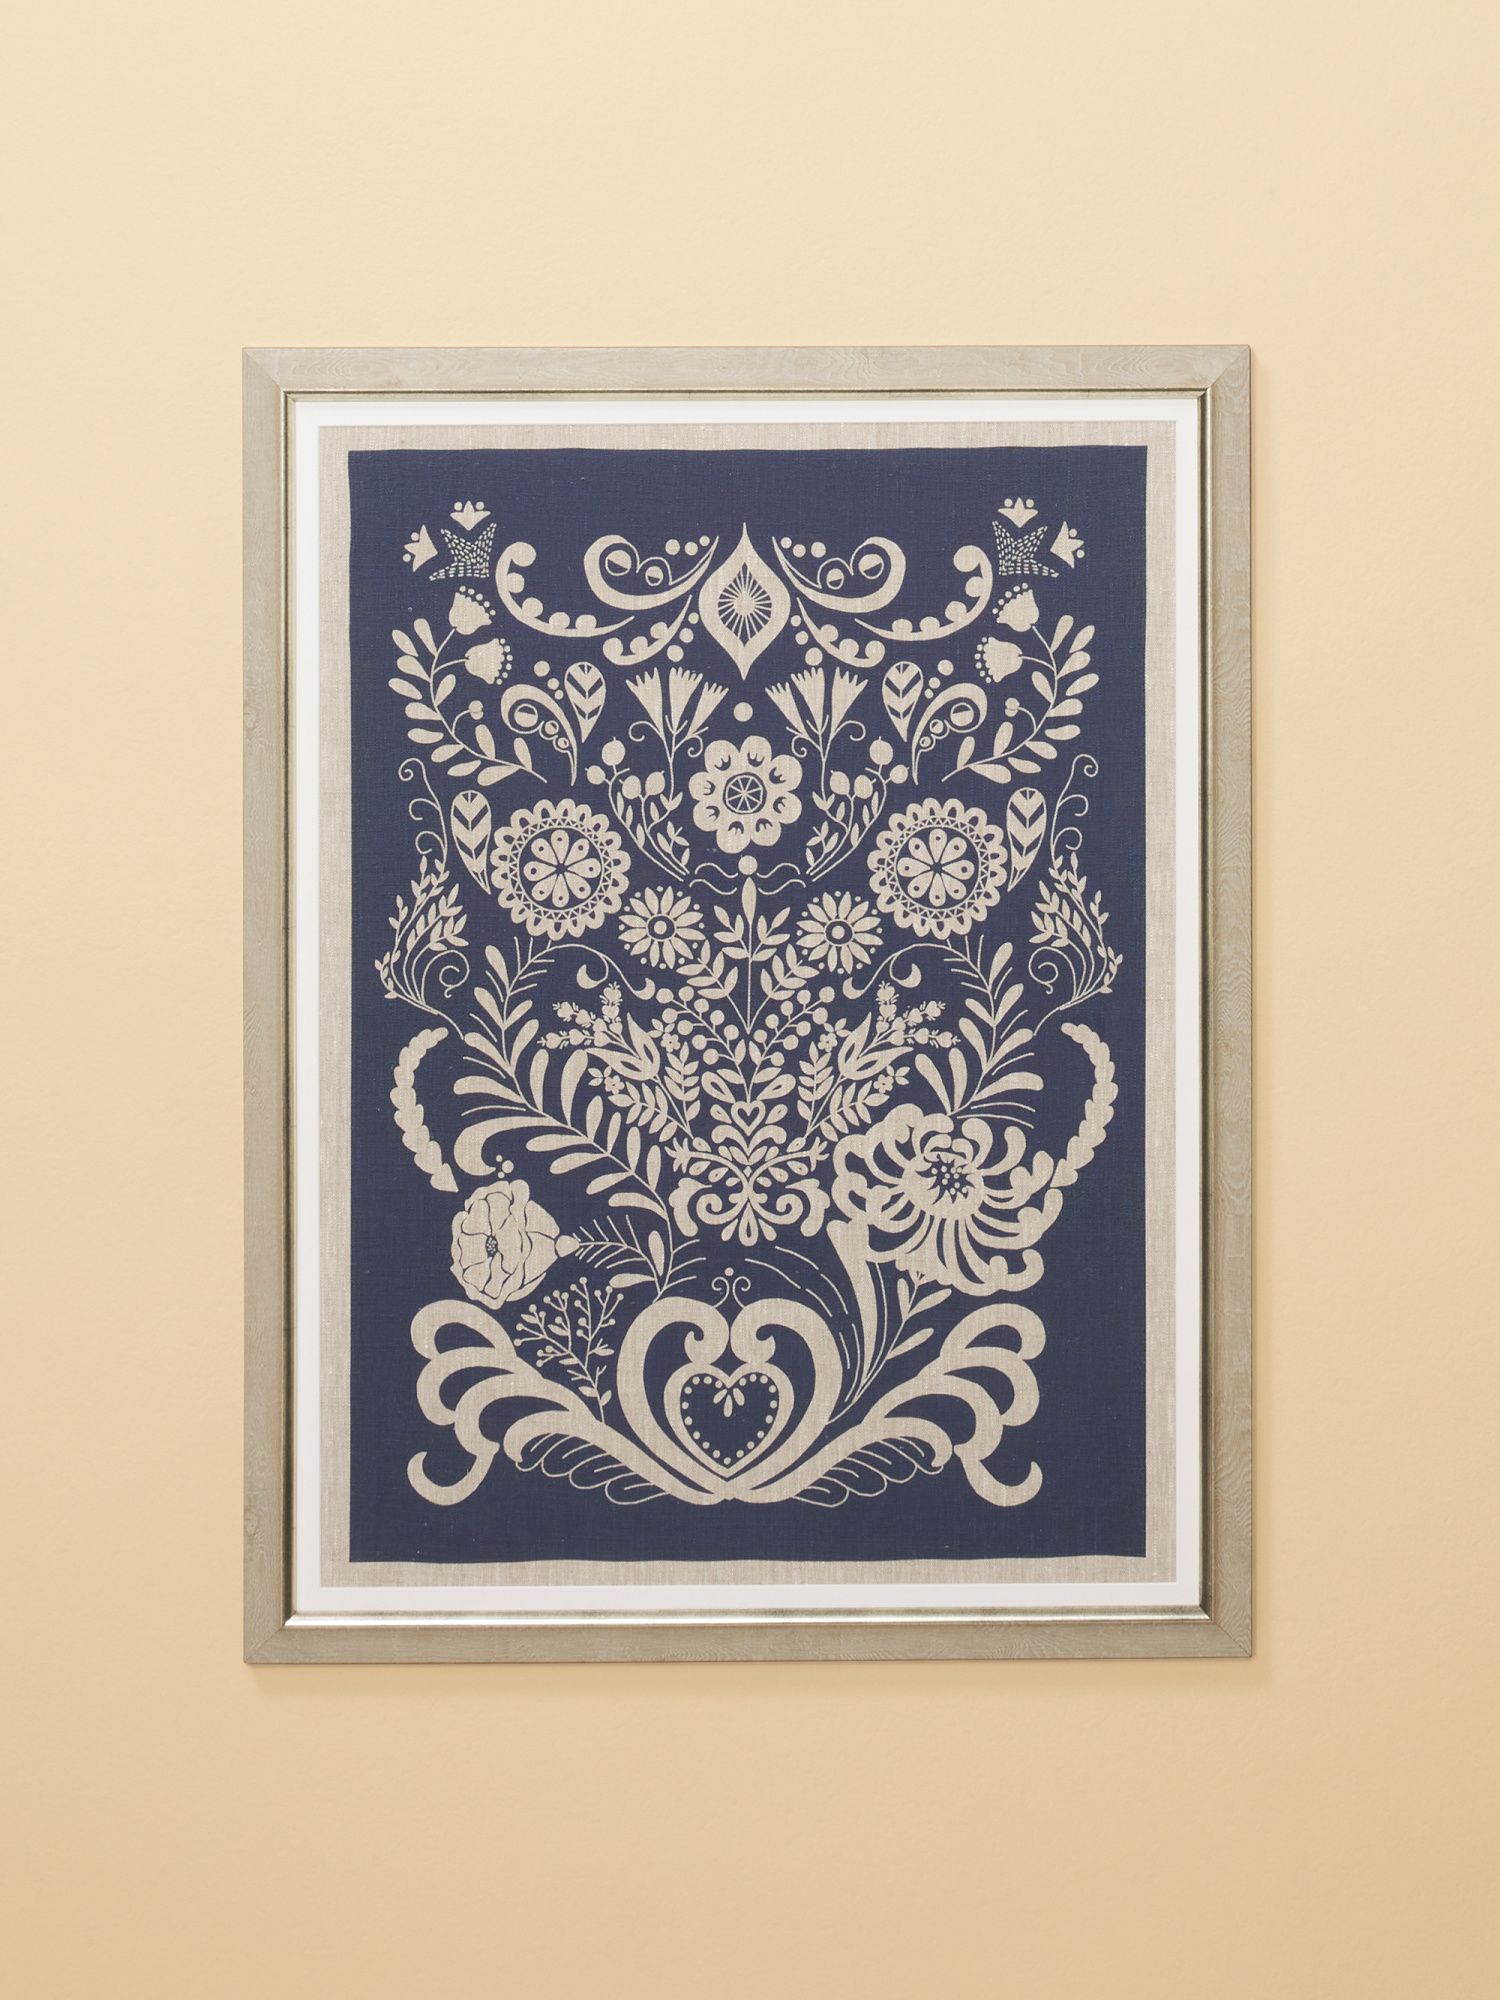 Made In Romania 24x32 Linen Ii Embroidery Wall Art In Frame | HomeGoods